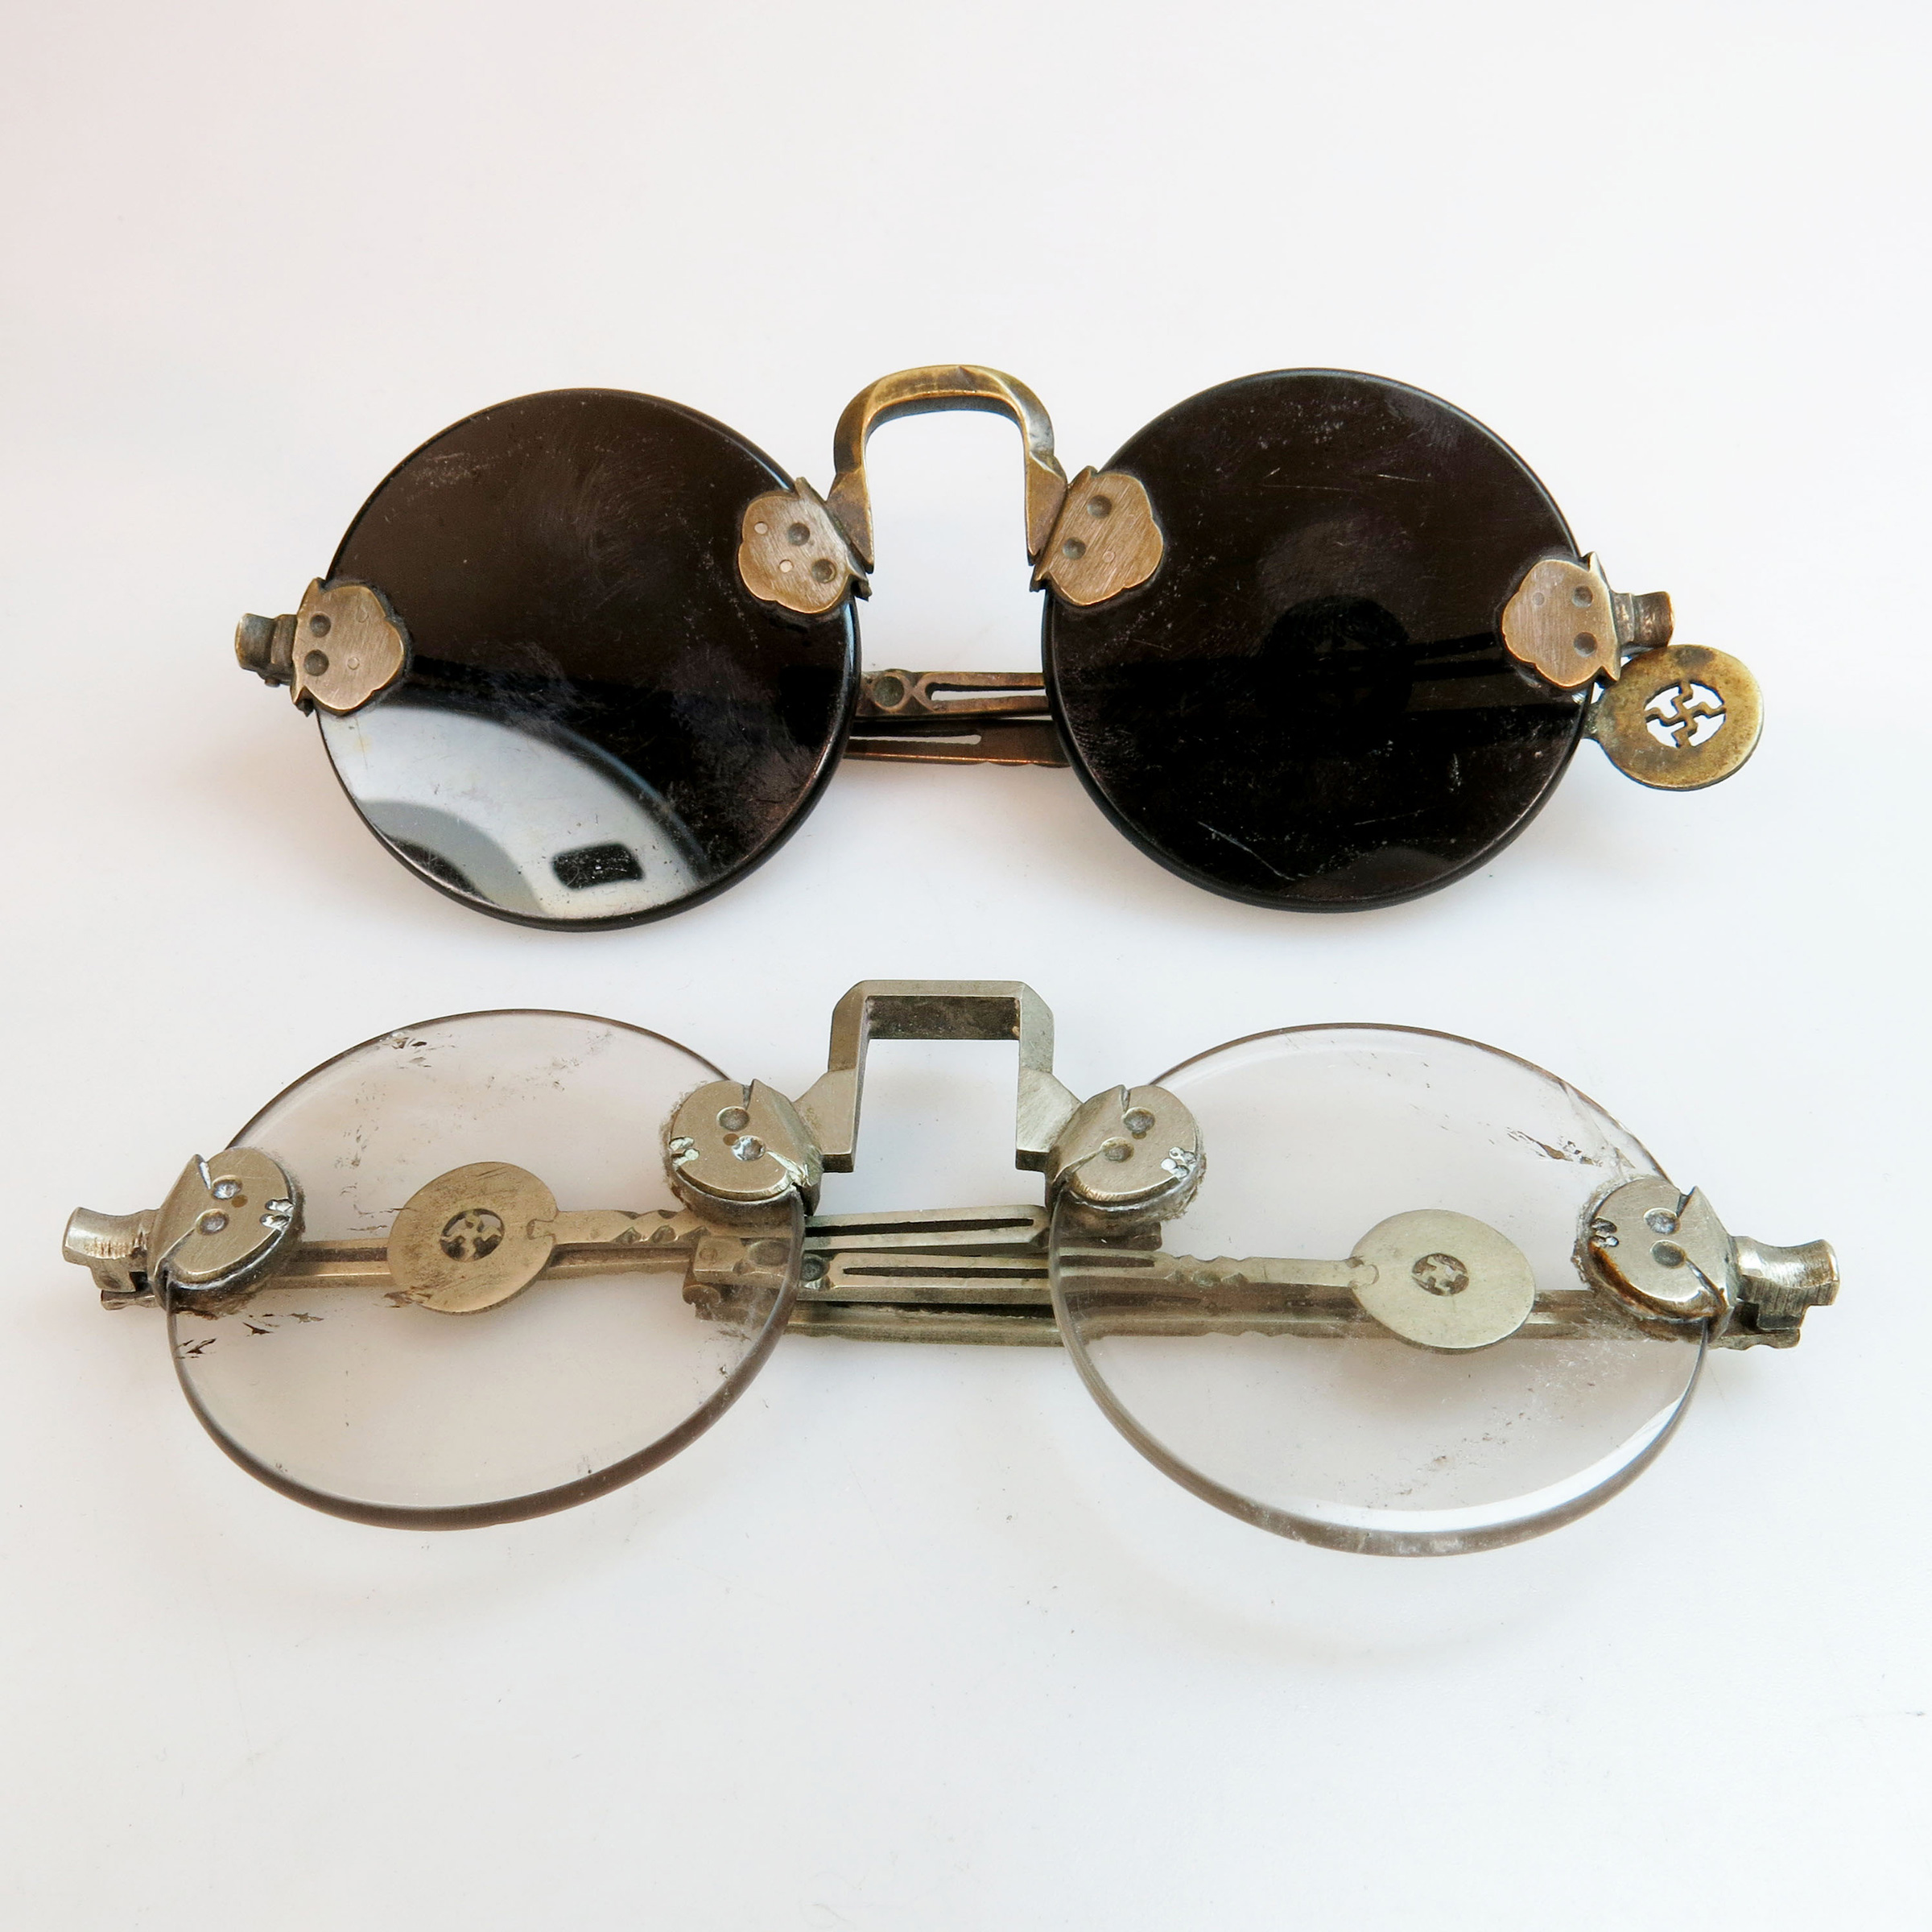 2 Pairs Of 19th Century Chinese Frameless Spectacles